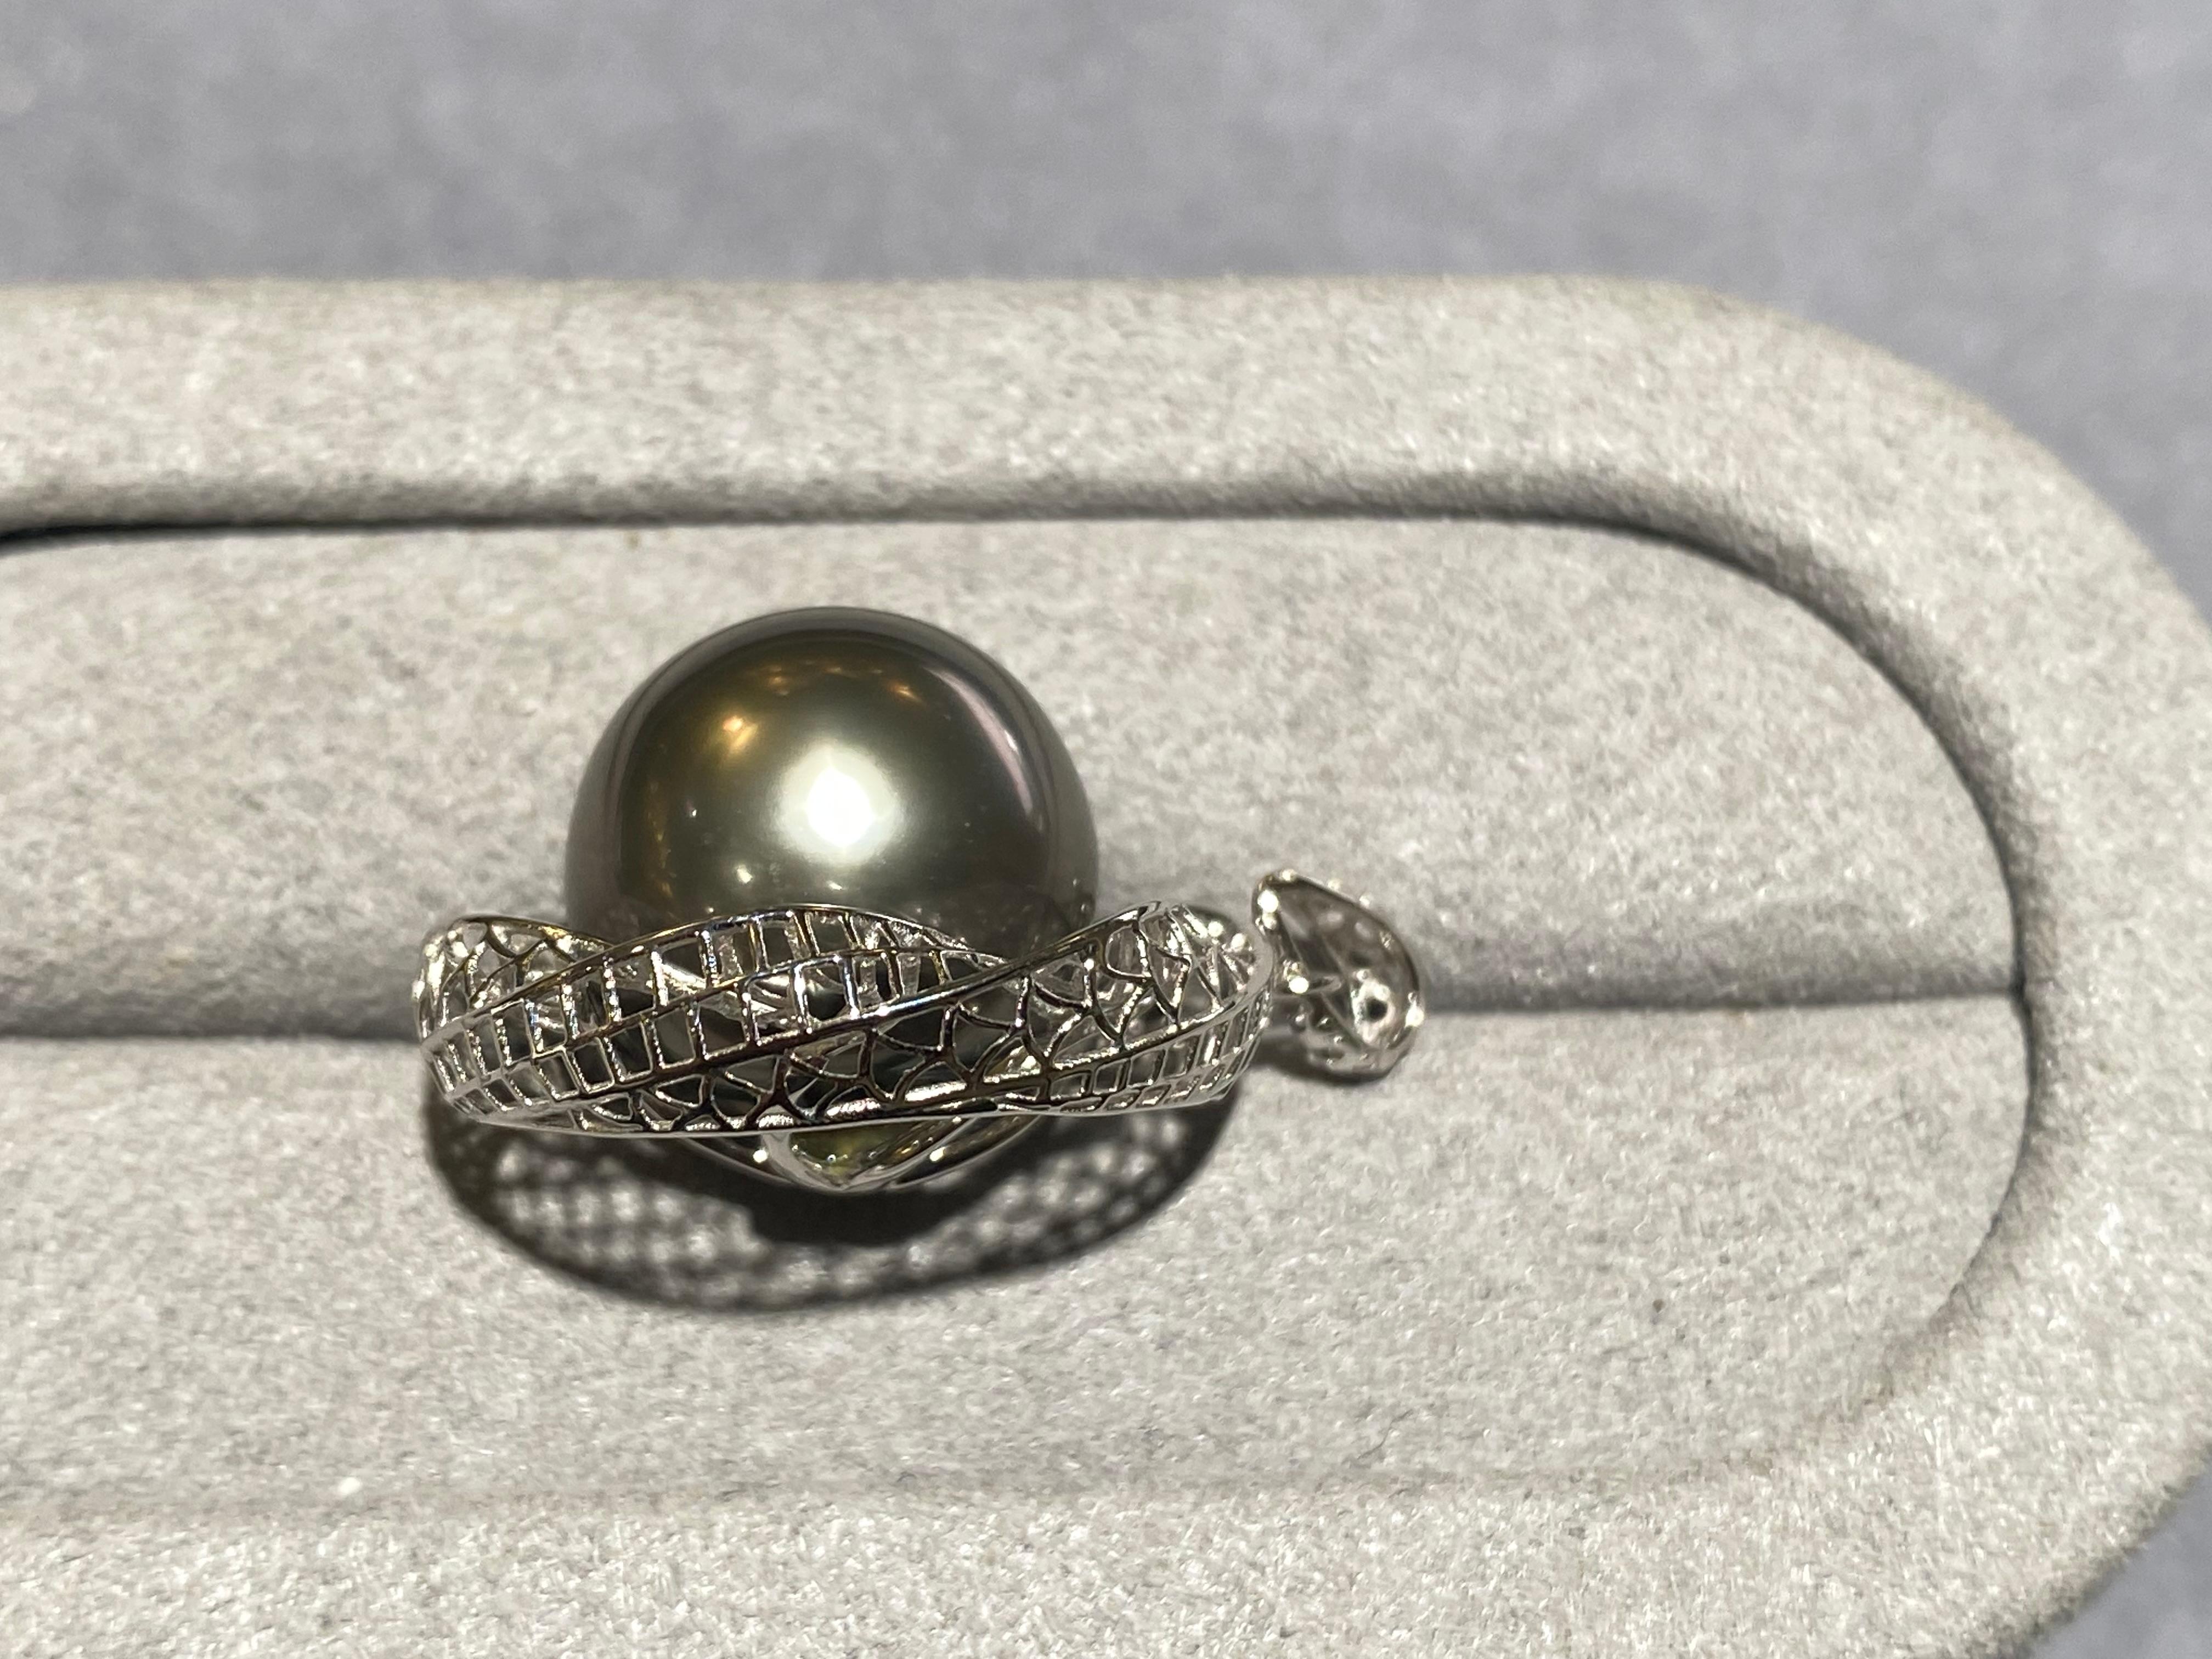 A round 13.6 mm tahitian pearl pendant in 18k white gold. The pearl is set in the middle of a round 18k white gold mesh which you can see through. It is a very simple design and is perfect for everyday wear. The pearl is grey in colour with